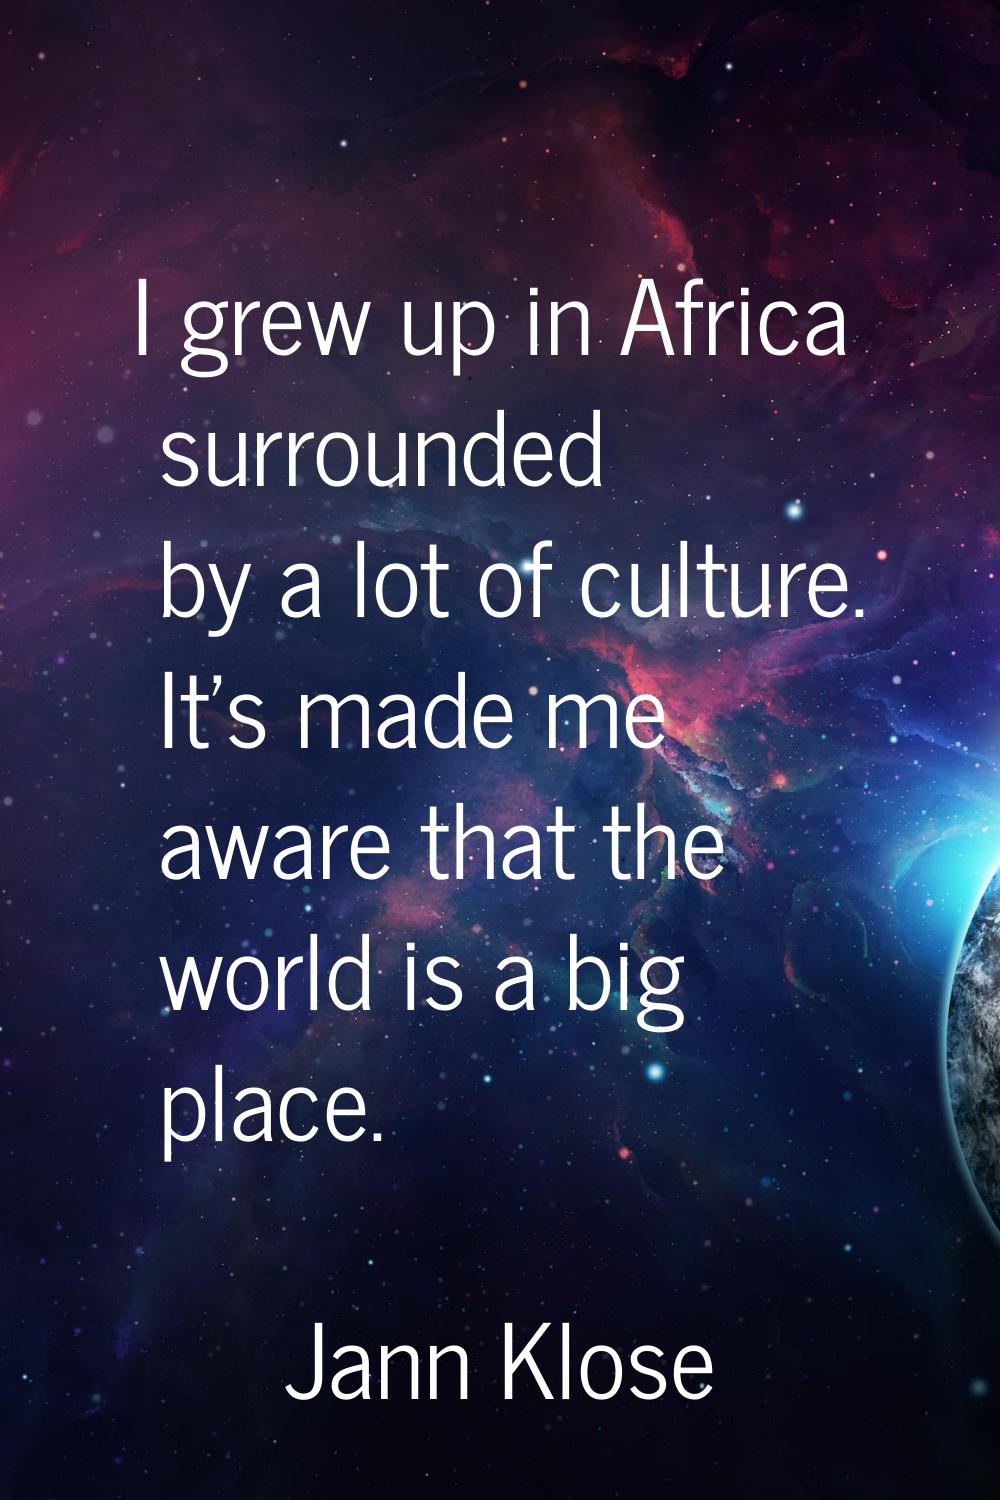 I grew up in Africa surrounded by a lot of culture. It's made me aware that the world is a big plac